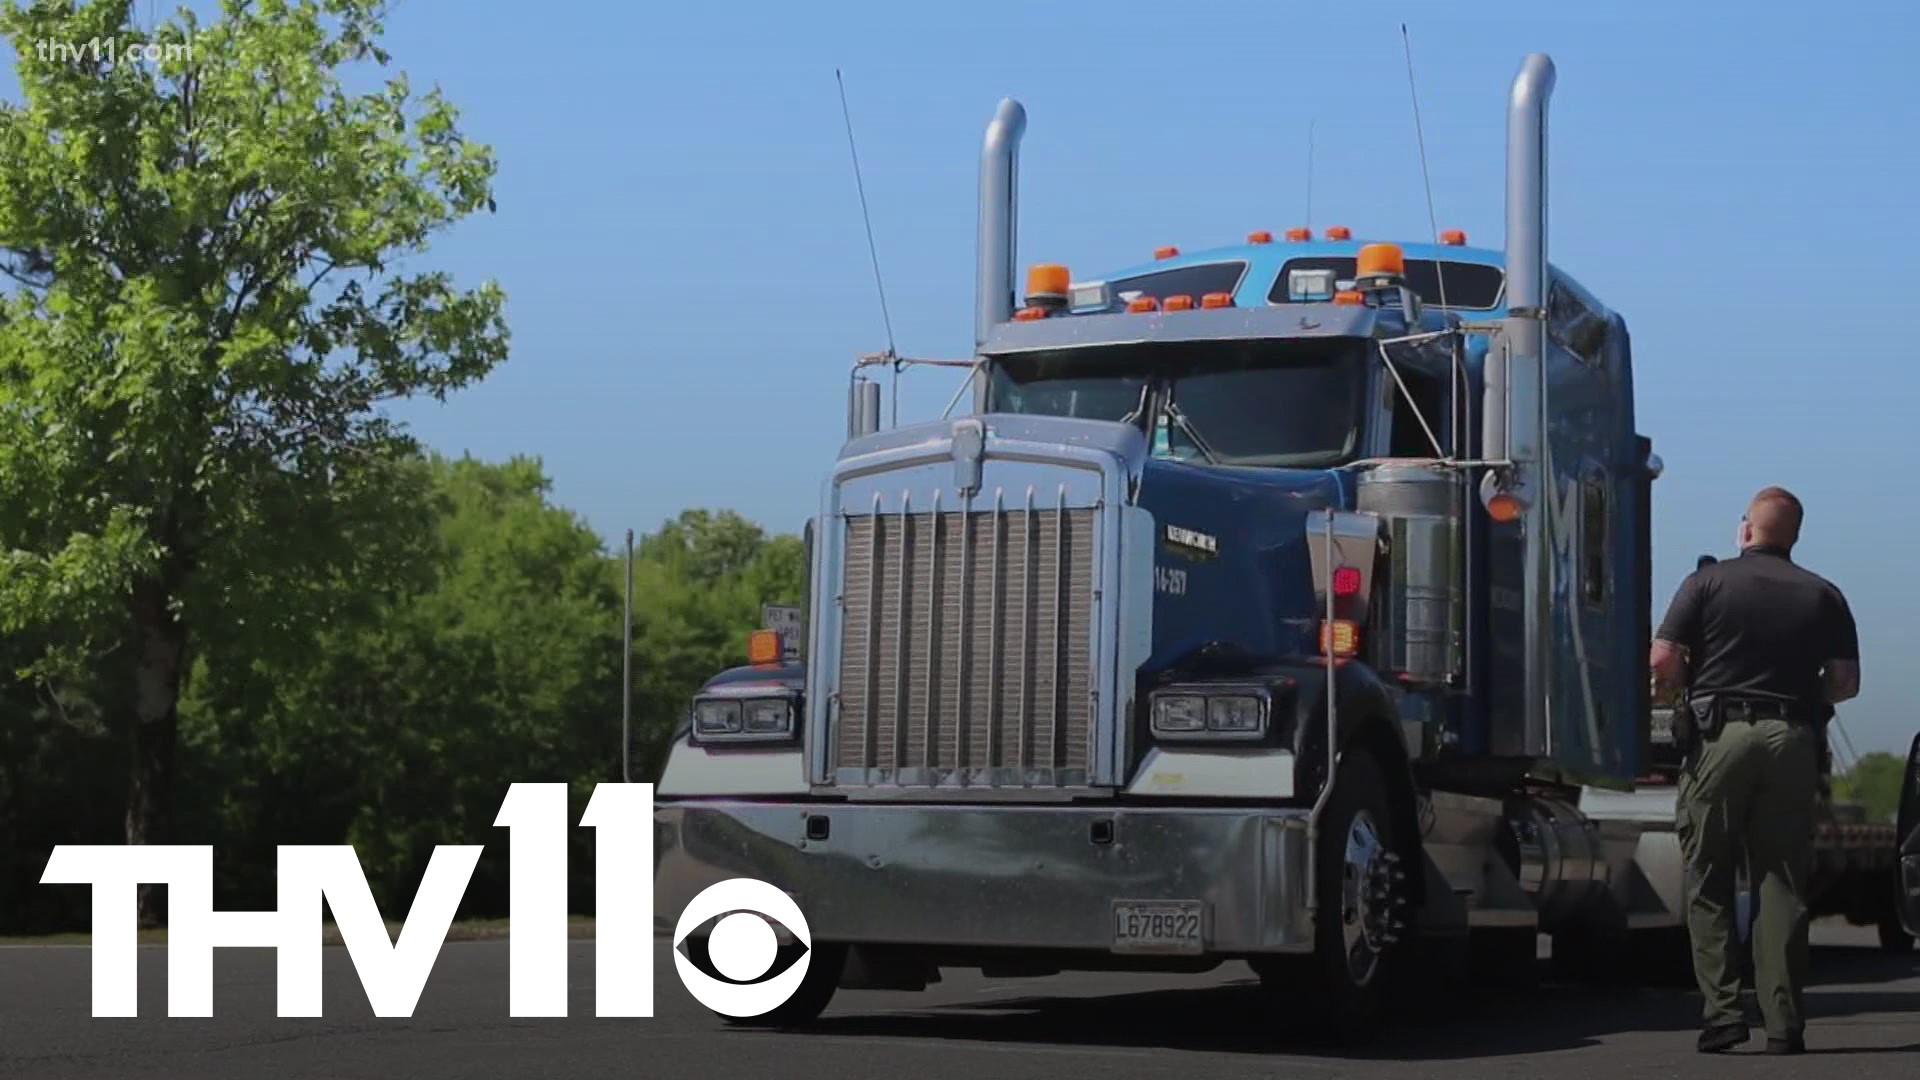 Several trucking companies are increasing incentives to get people to come to work for them like a pay increase, a sign-on bonus, and a referral bonus.